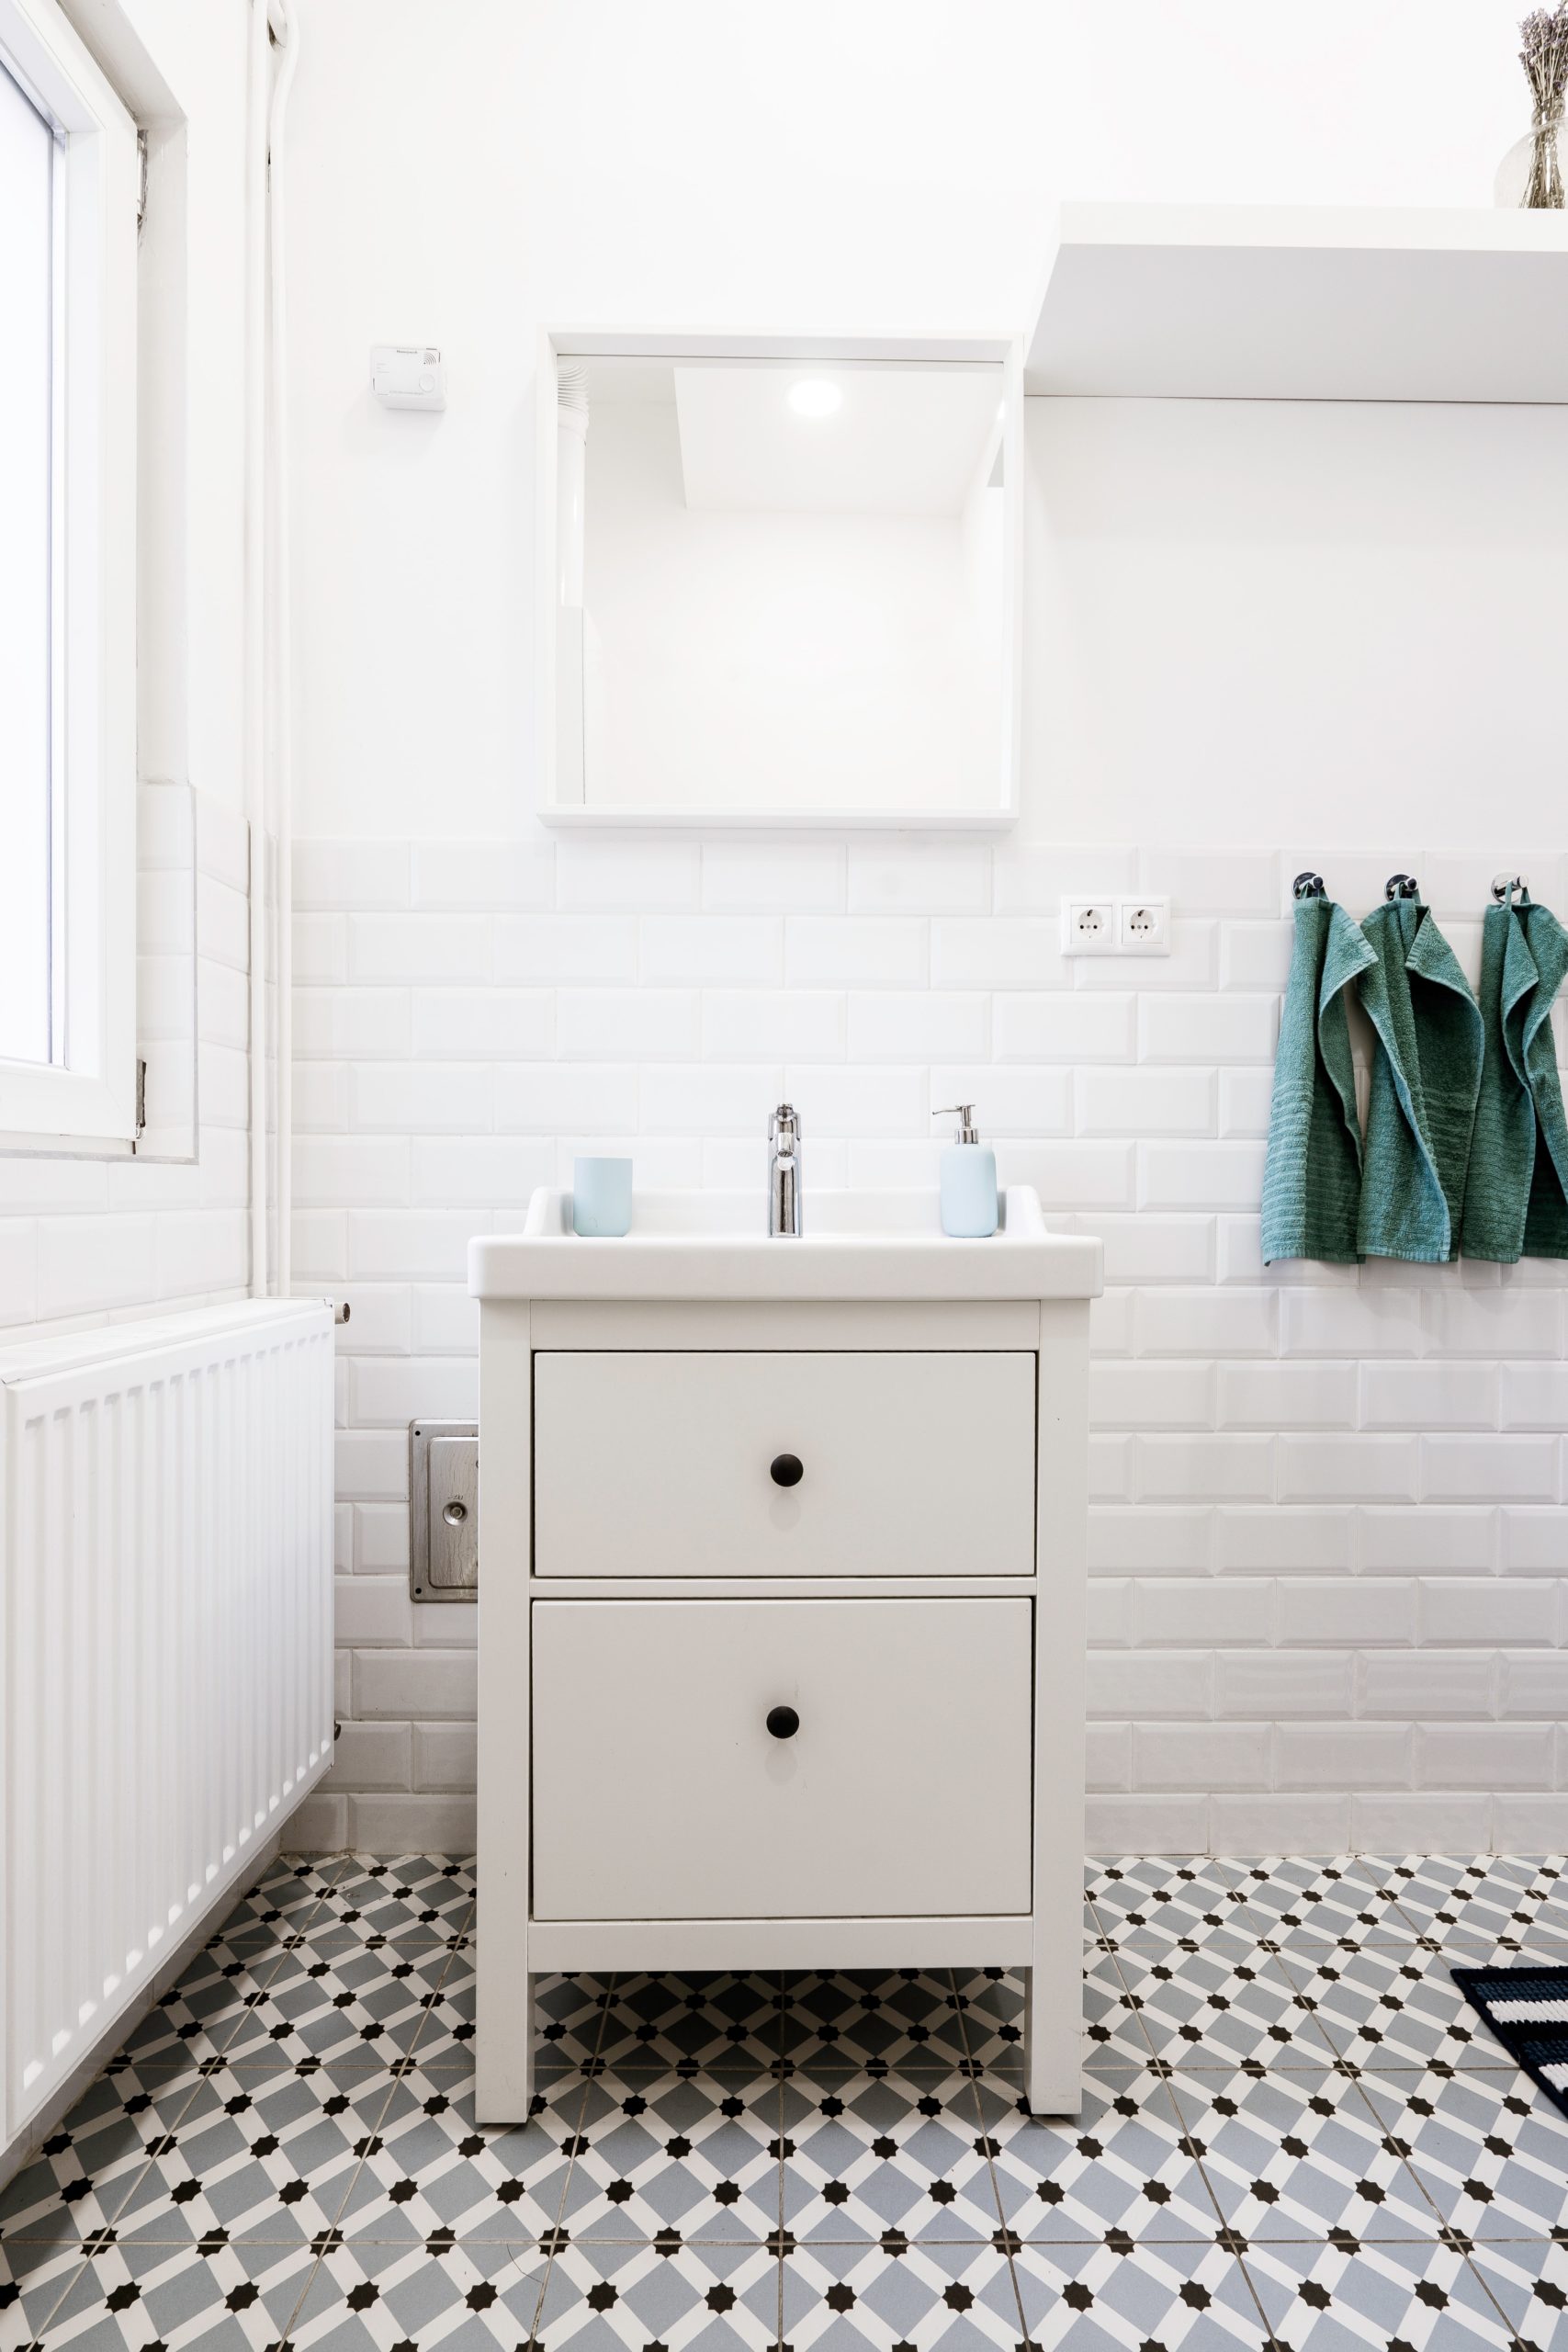 5 Storage Solutions for Small Bathrooms